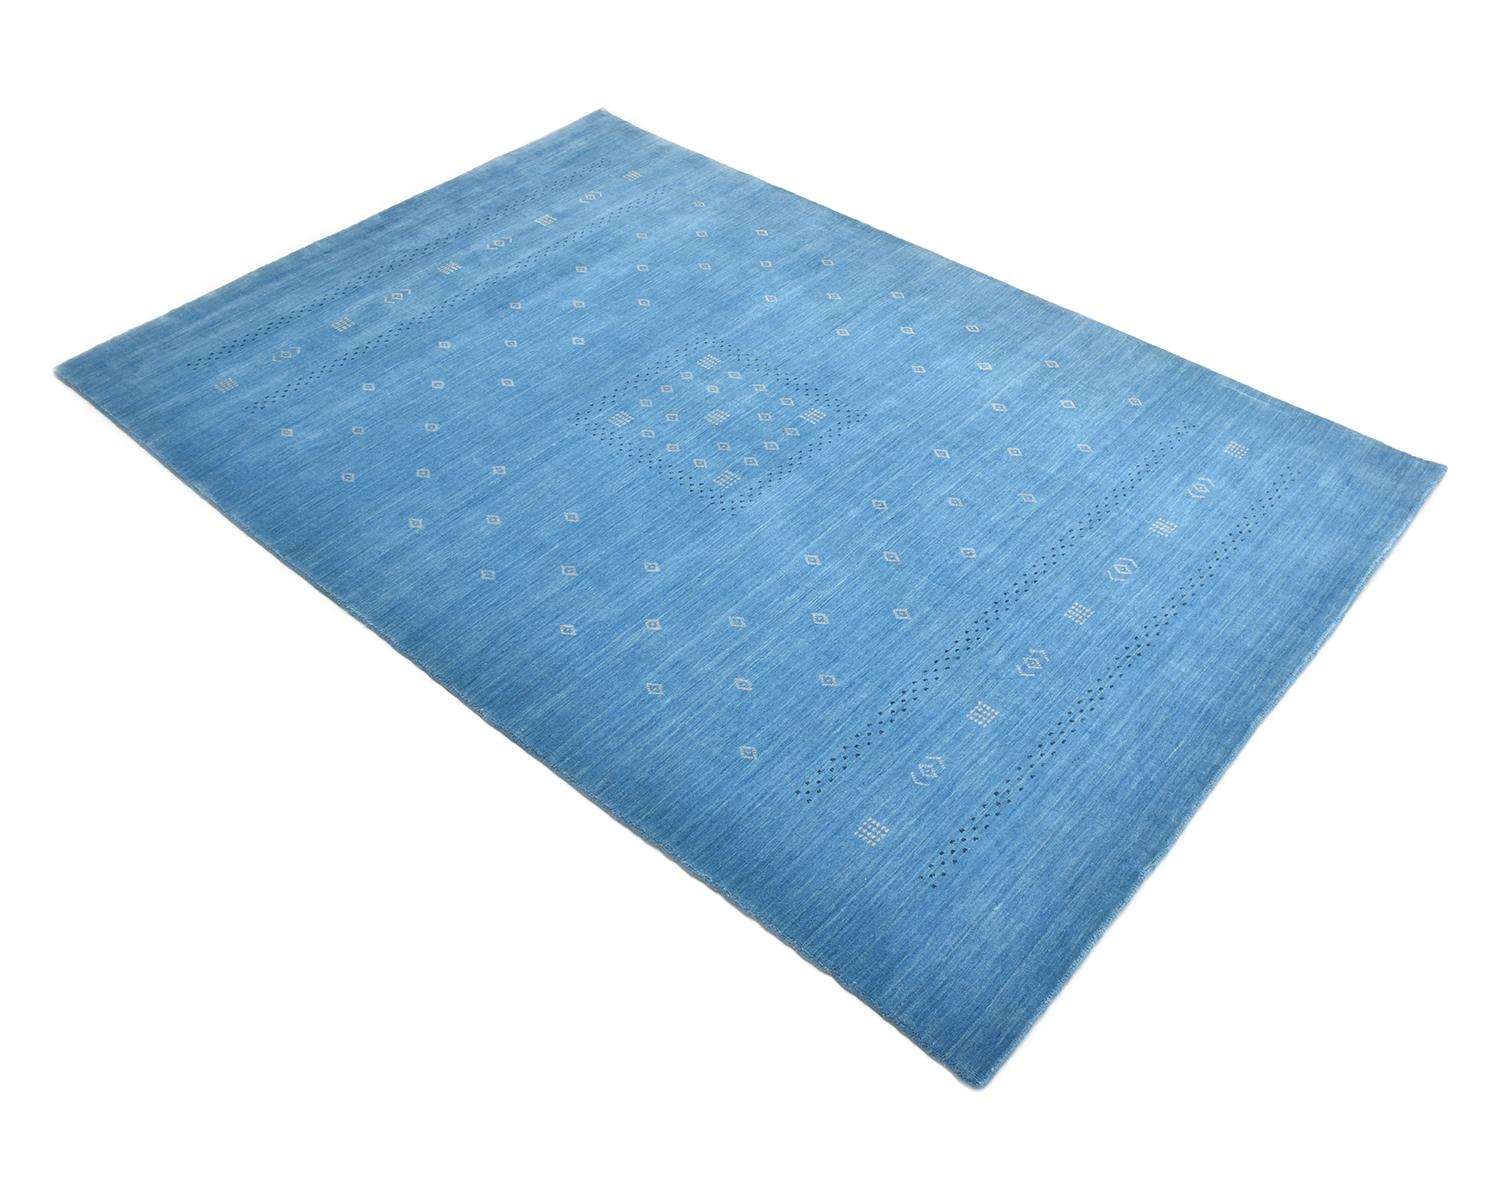 Solo Rugs Gabbeh Tribal Hand Loom Blue Area Rug For Sale 1